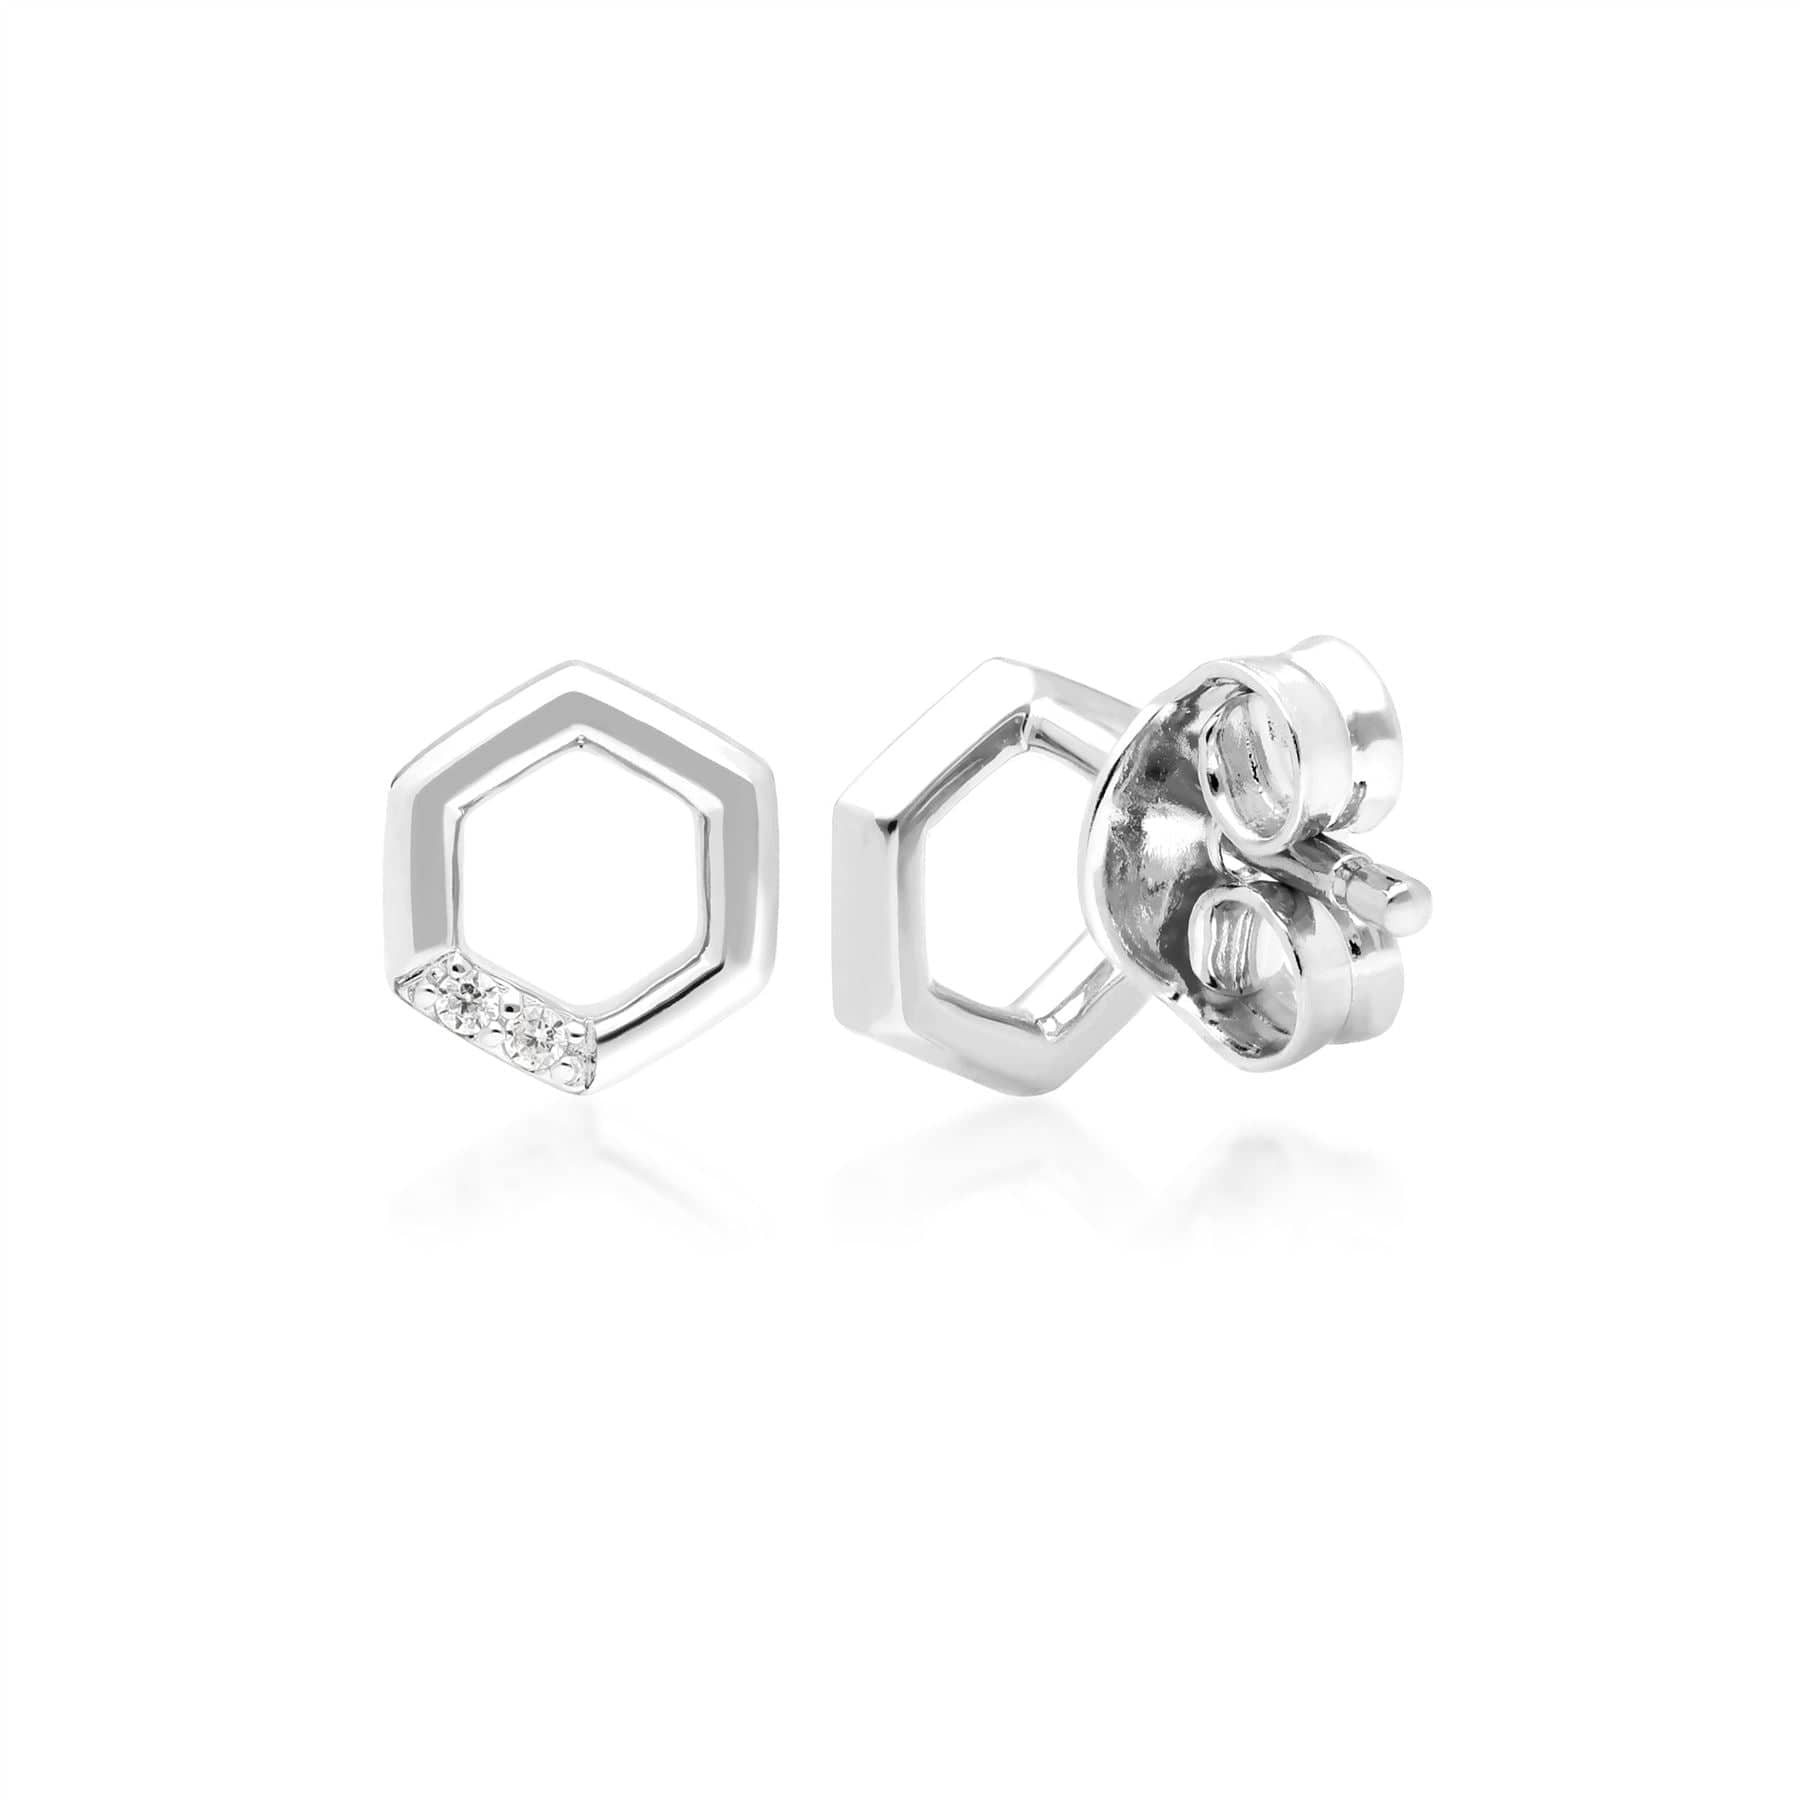 162E0270019 Diamond Pave Hexagon Stud Earrings in 9ct White Gold 2